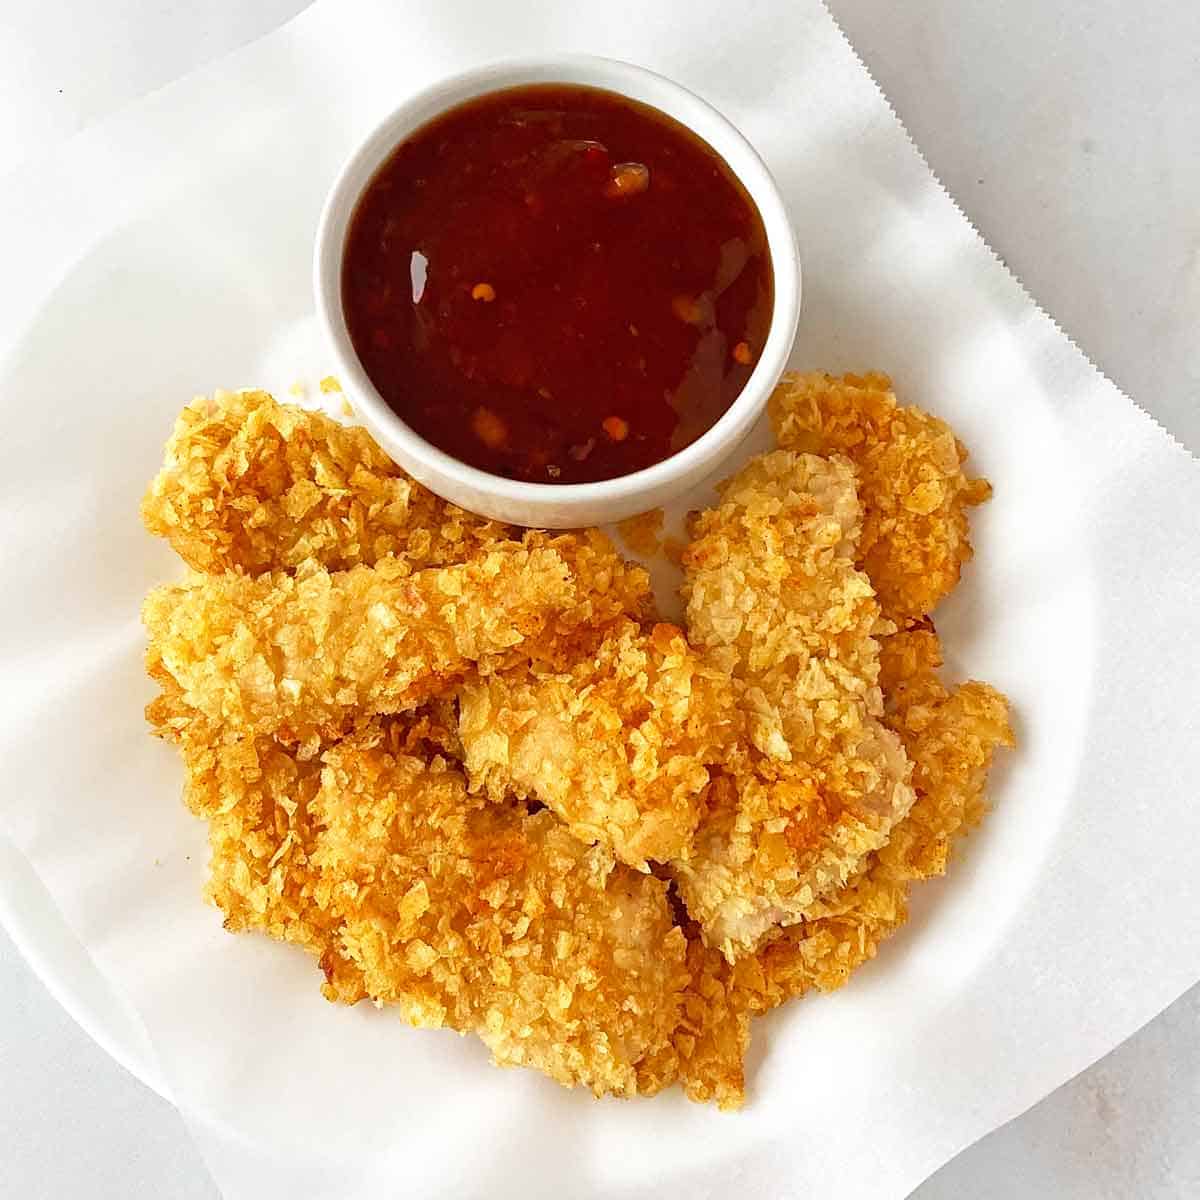 A dozen pieces of golden brown potato chip chicken tenders on a plate with sweet chili sauce for dipping.